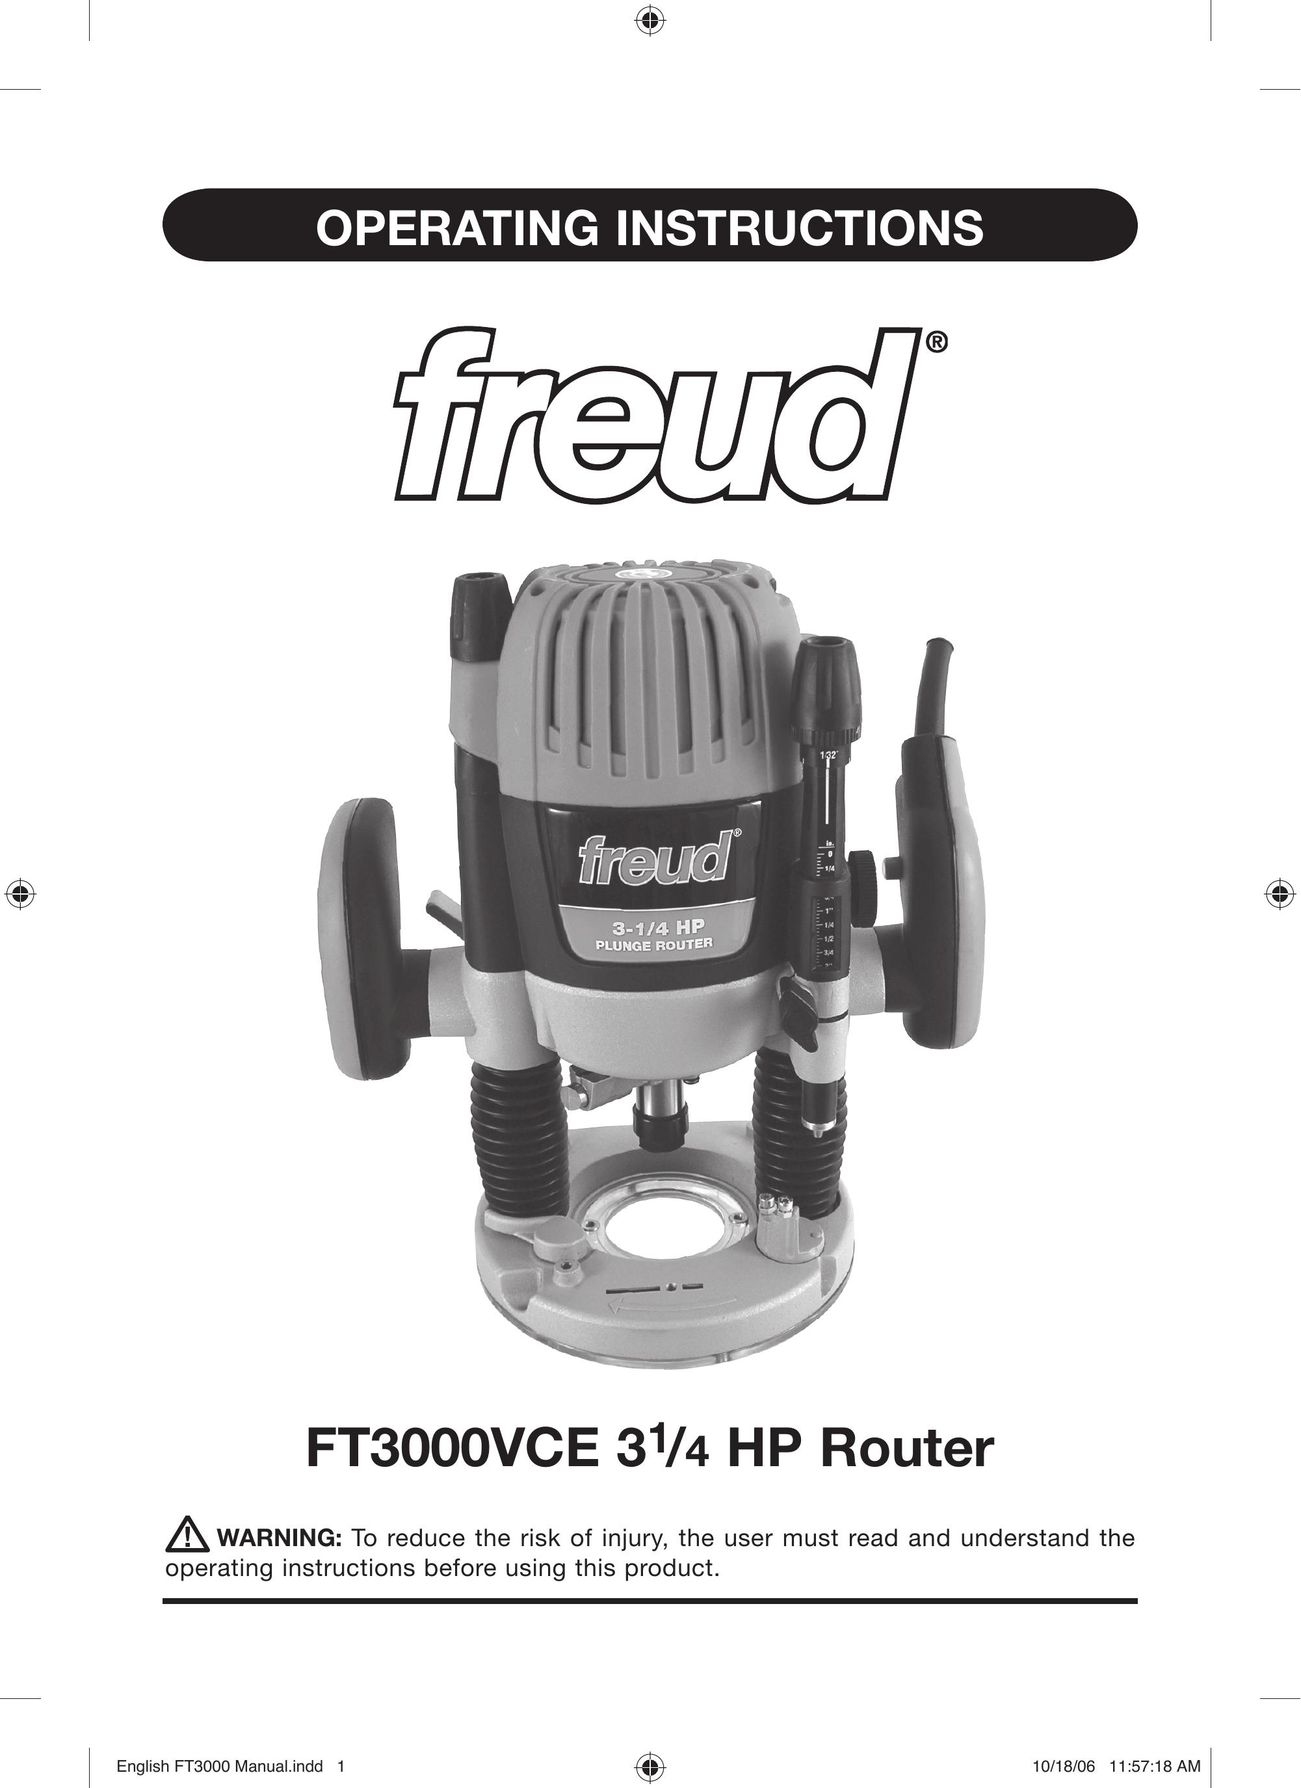 Freud Tools FT3000VCE Router User Manual